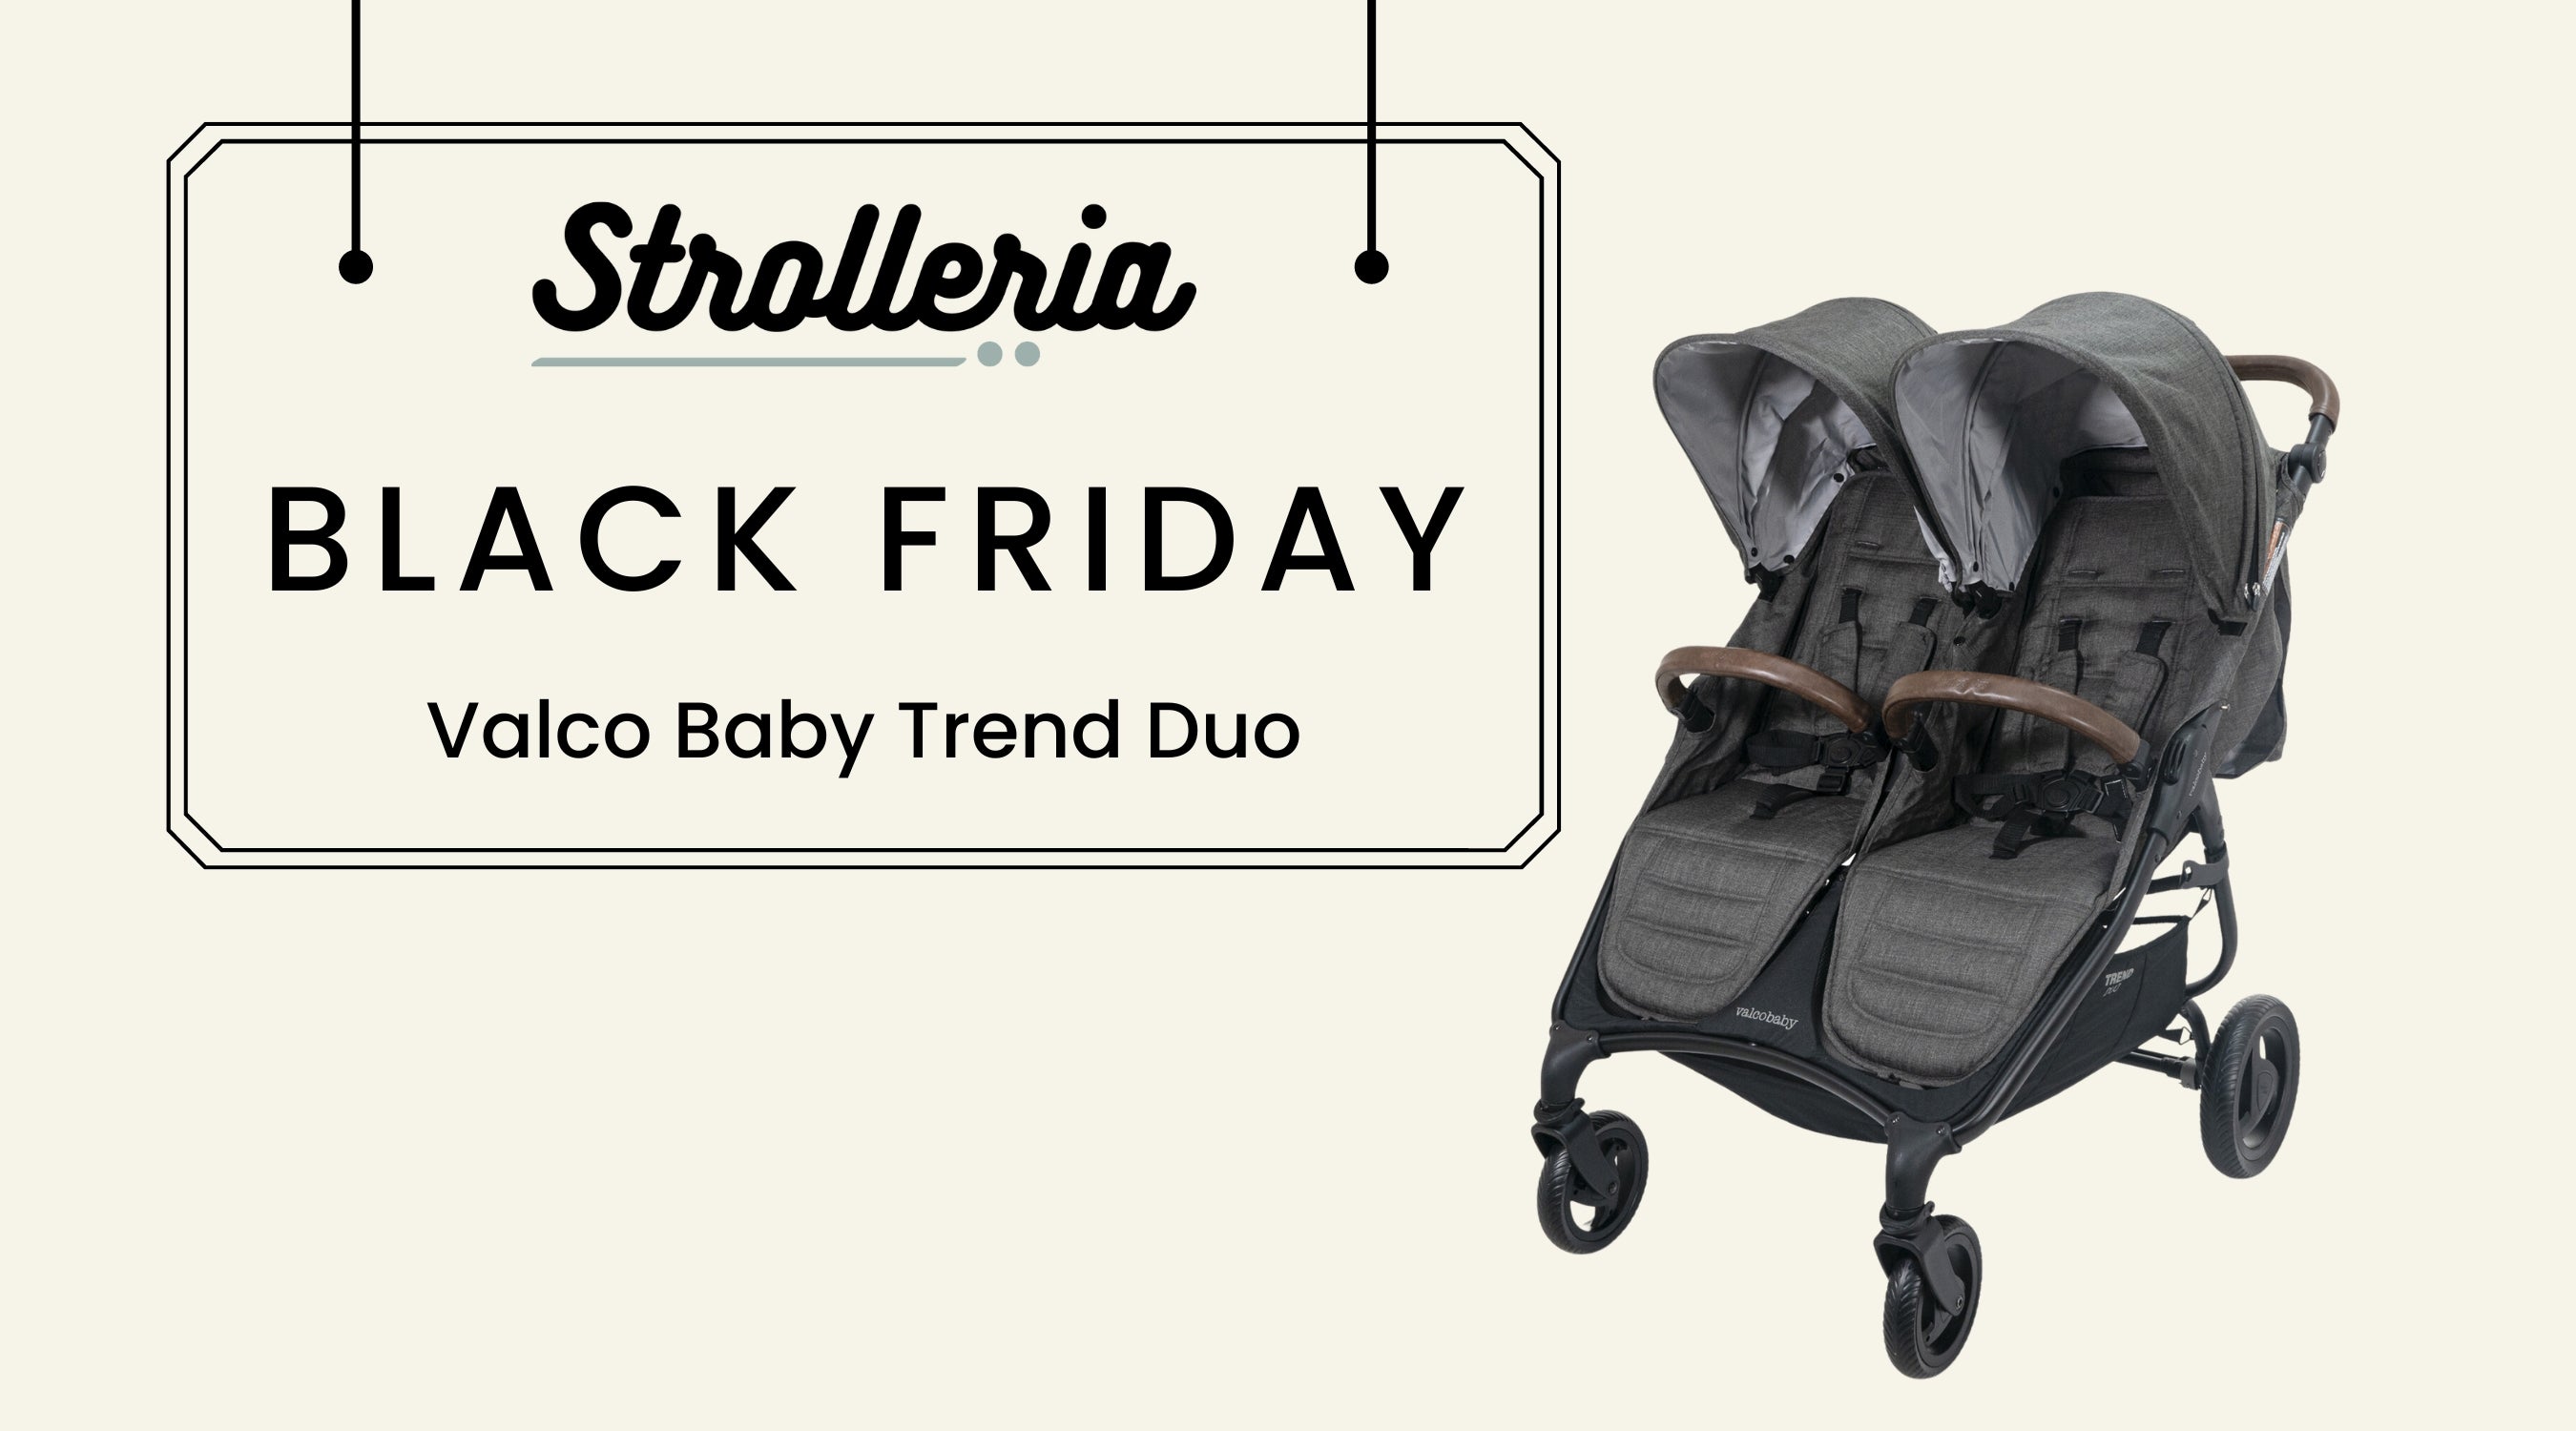 Valco Baby Trend Duo double stroller black friday sale